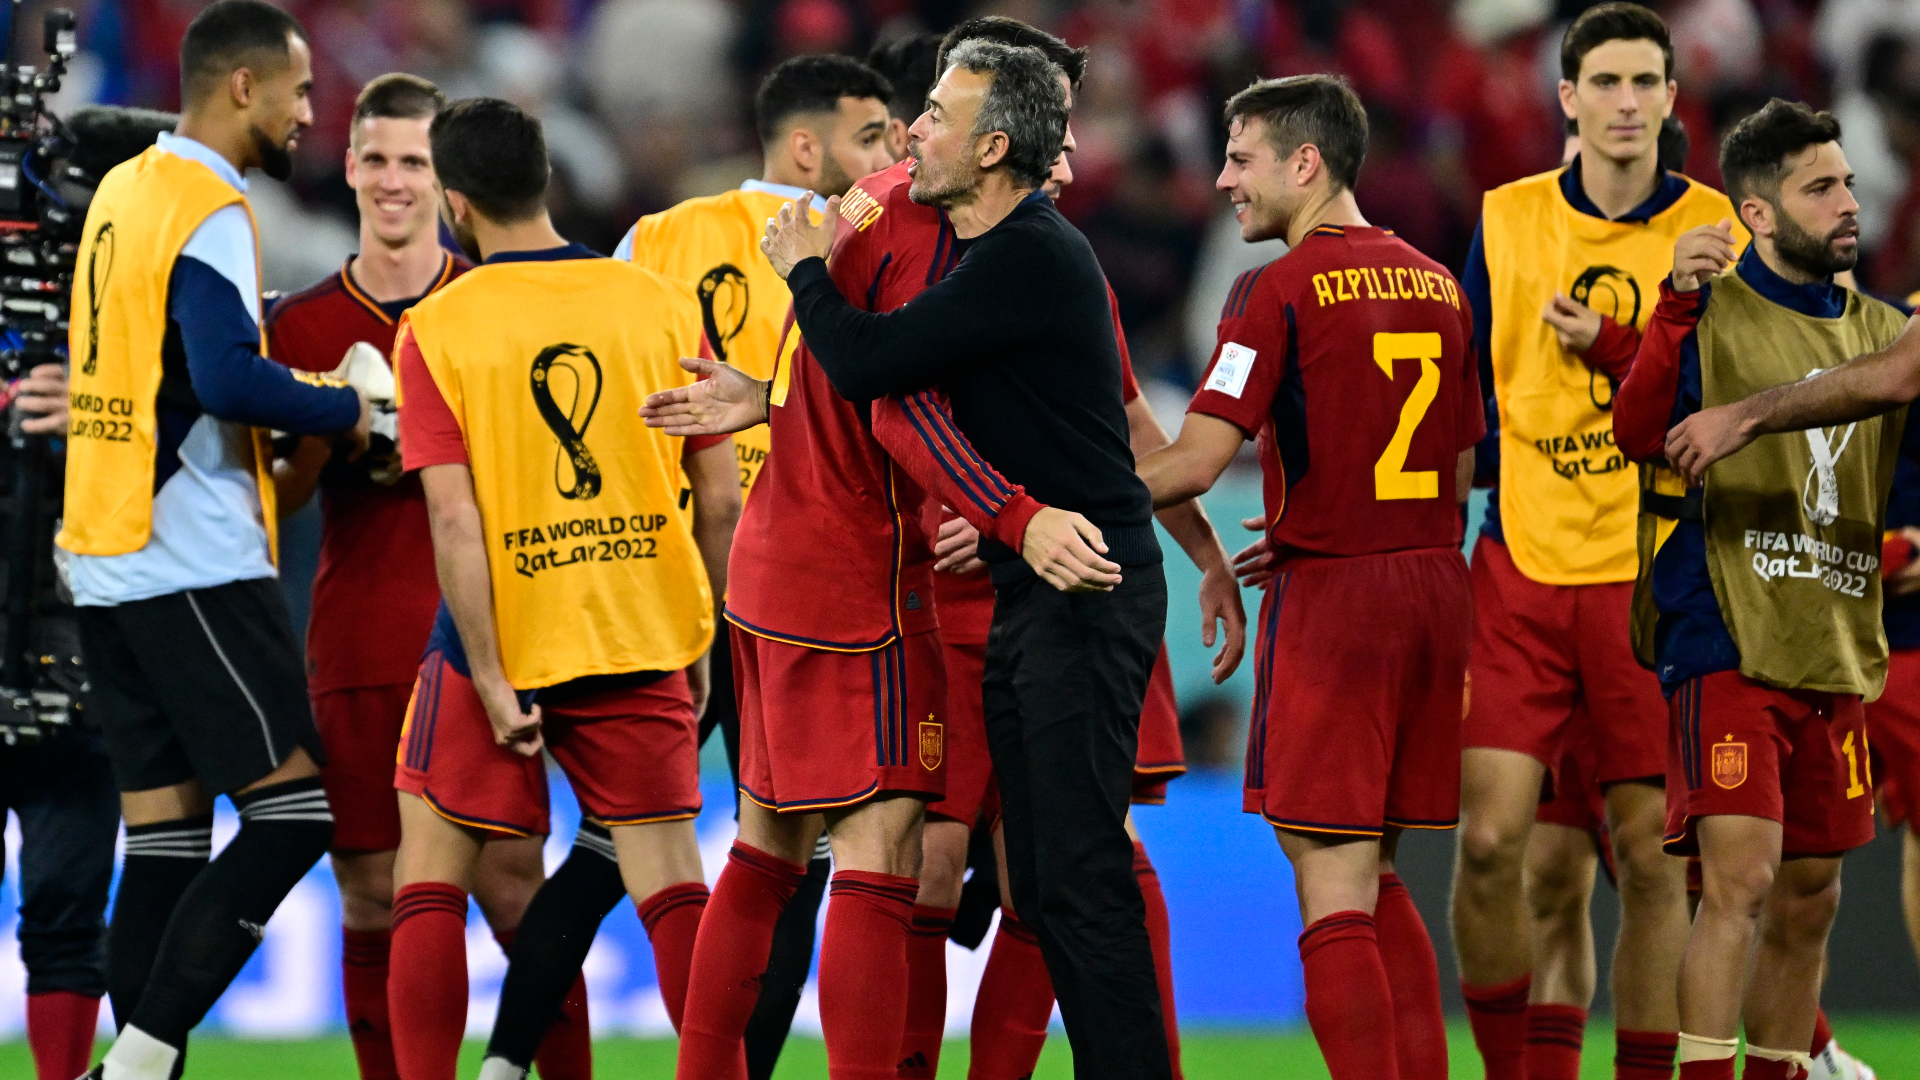 Spain thrashes Costa Rica 7-0 in World Cup opening match - newsaf.cgtn.com